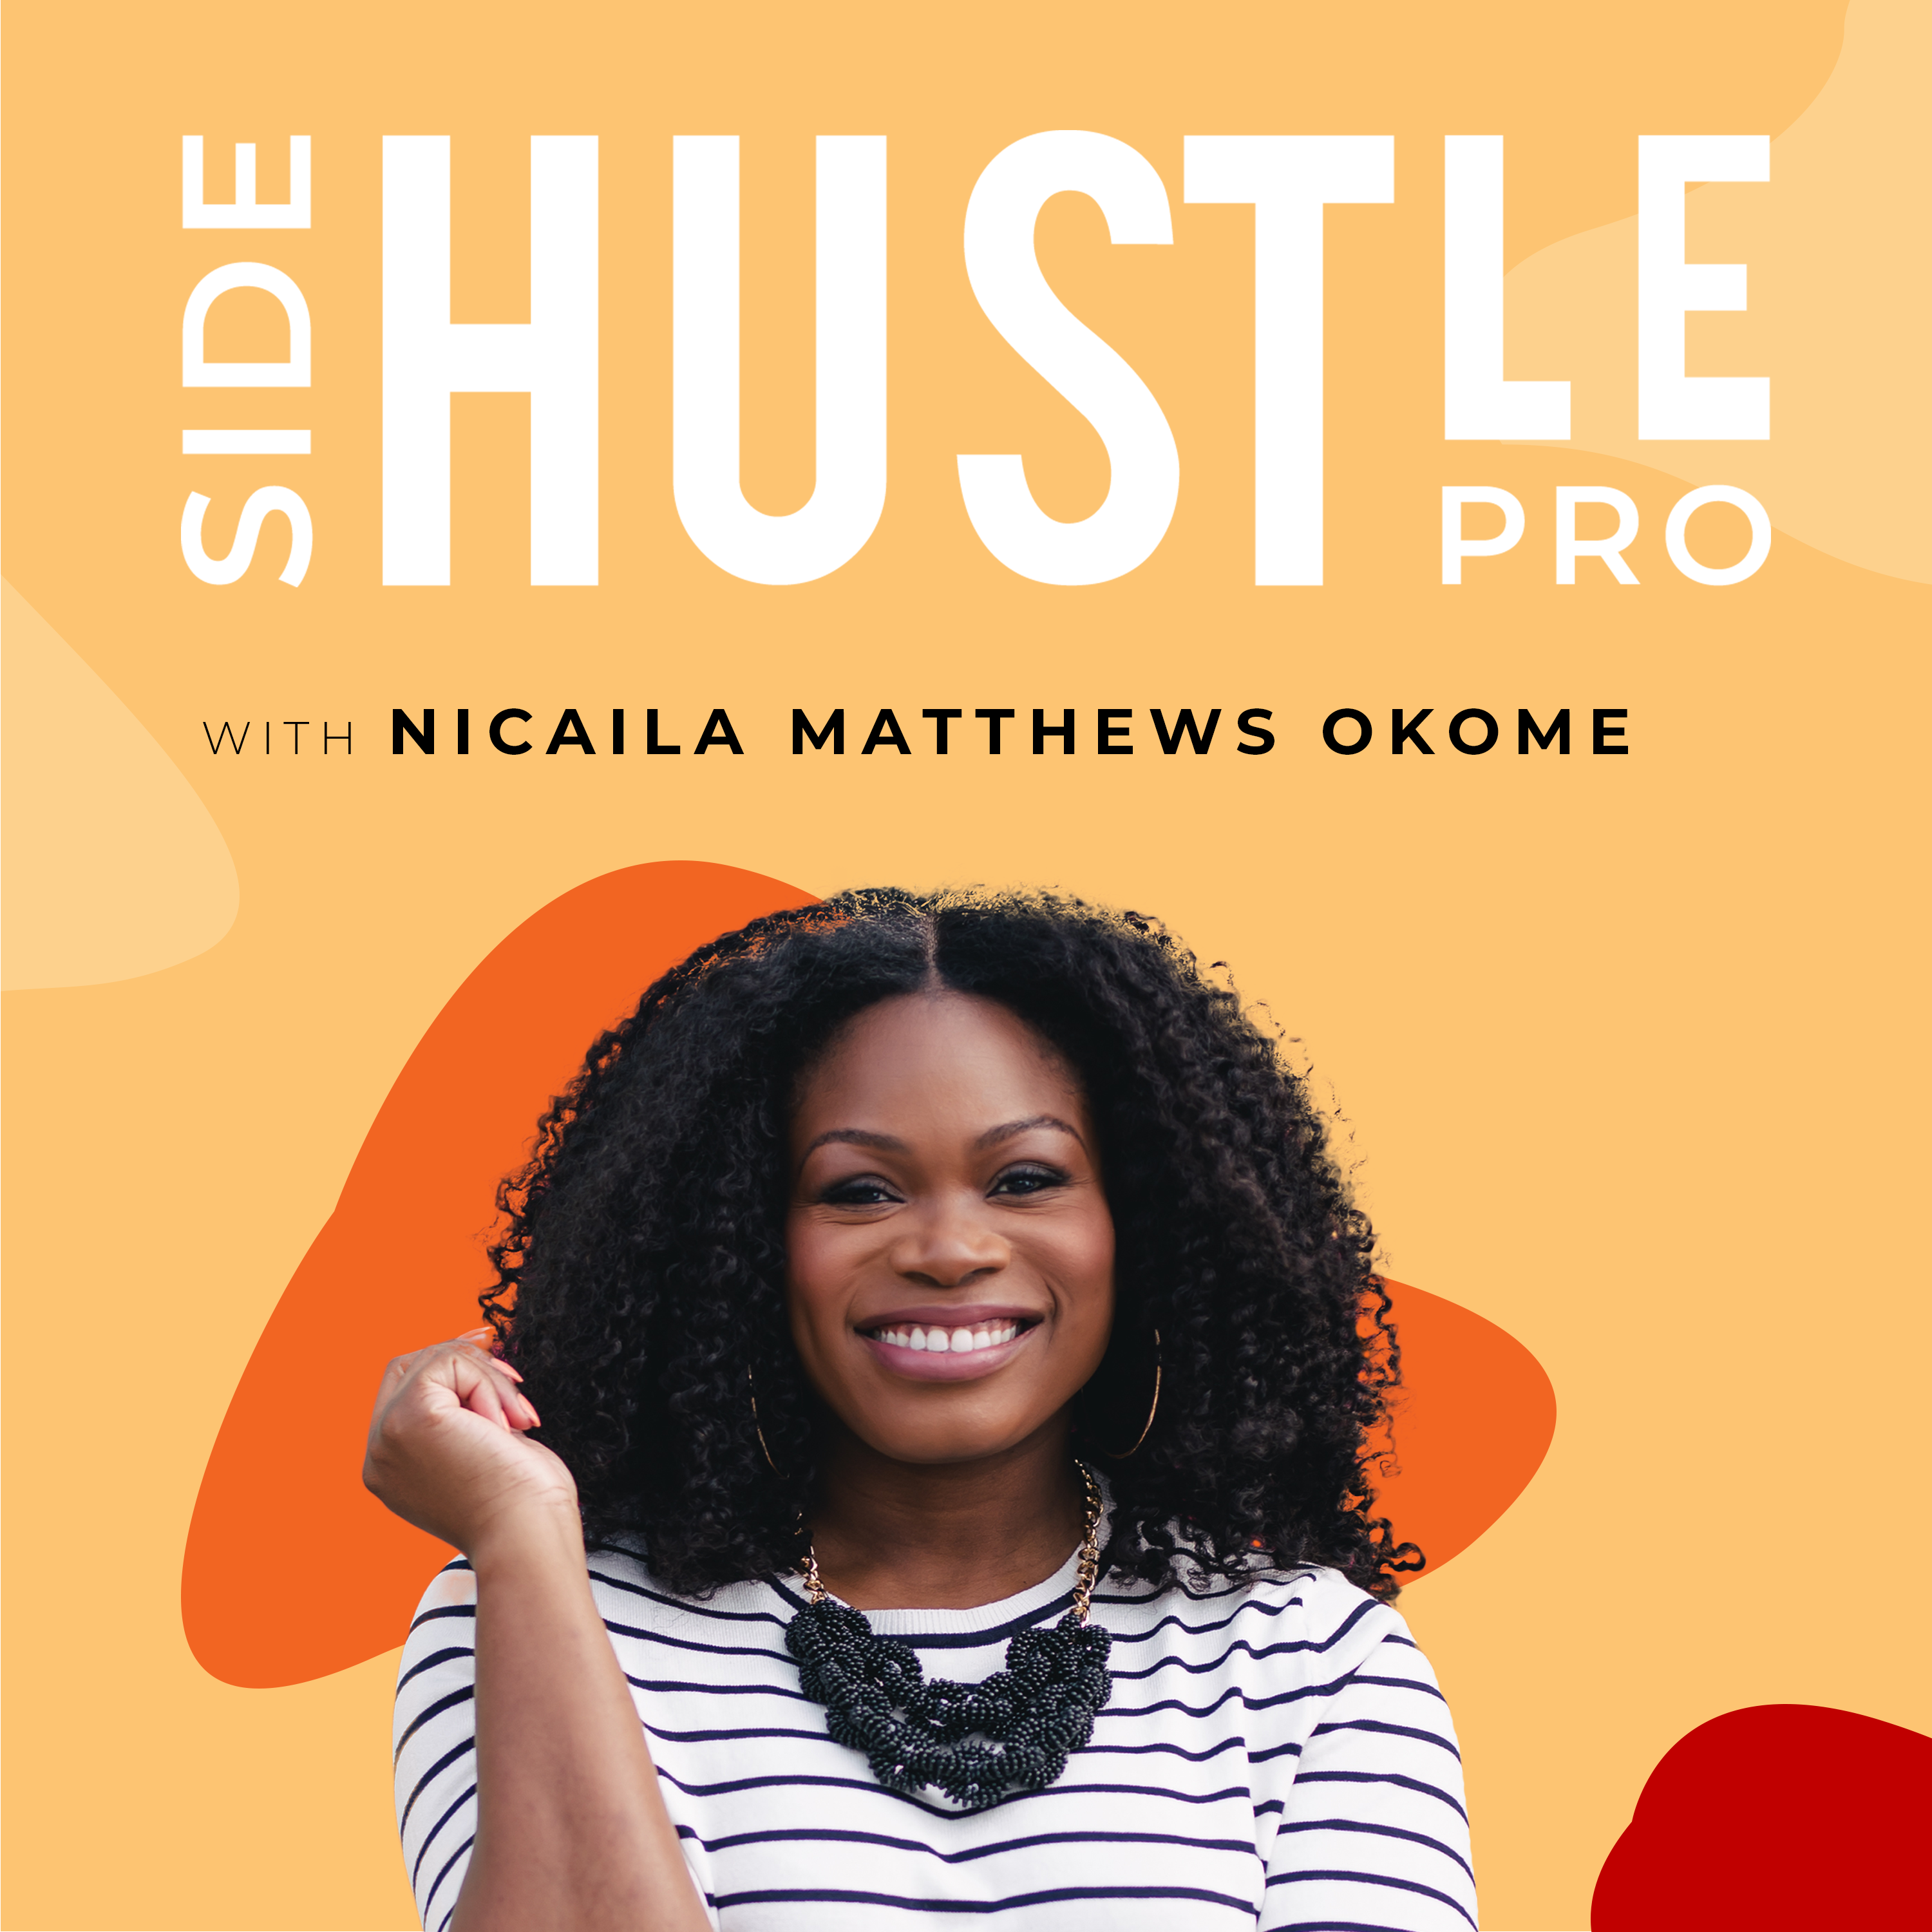 377: How CultureCon CEO Imani Ellis Went From Side Hustling VP to Full-Time Entrepreneur REWIND